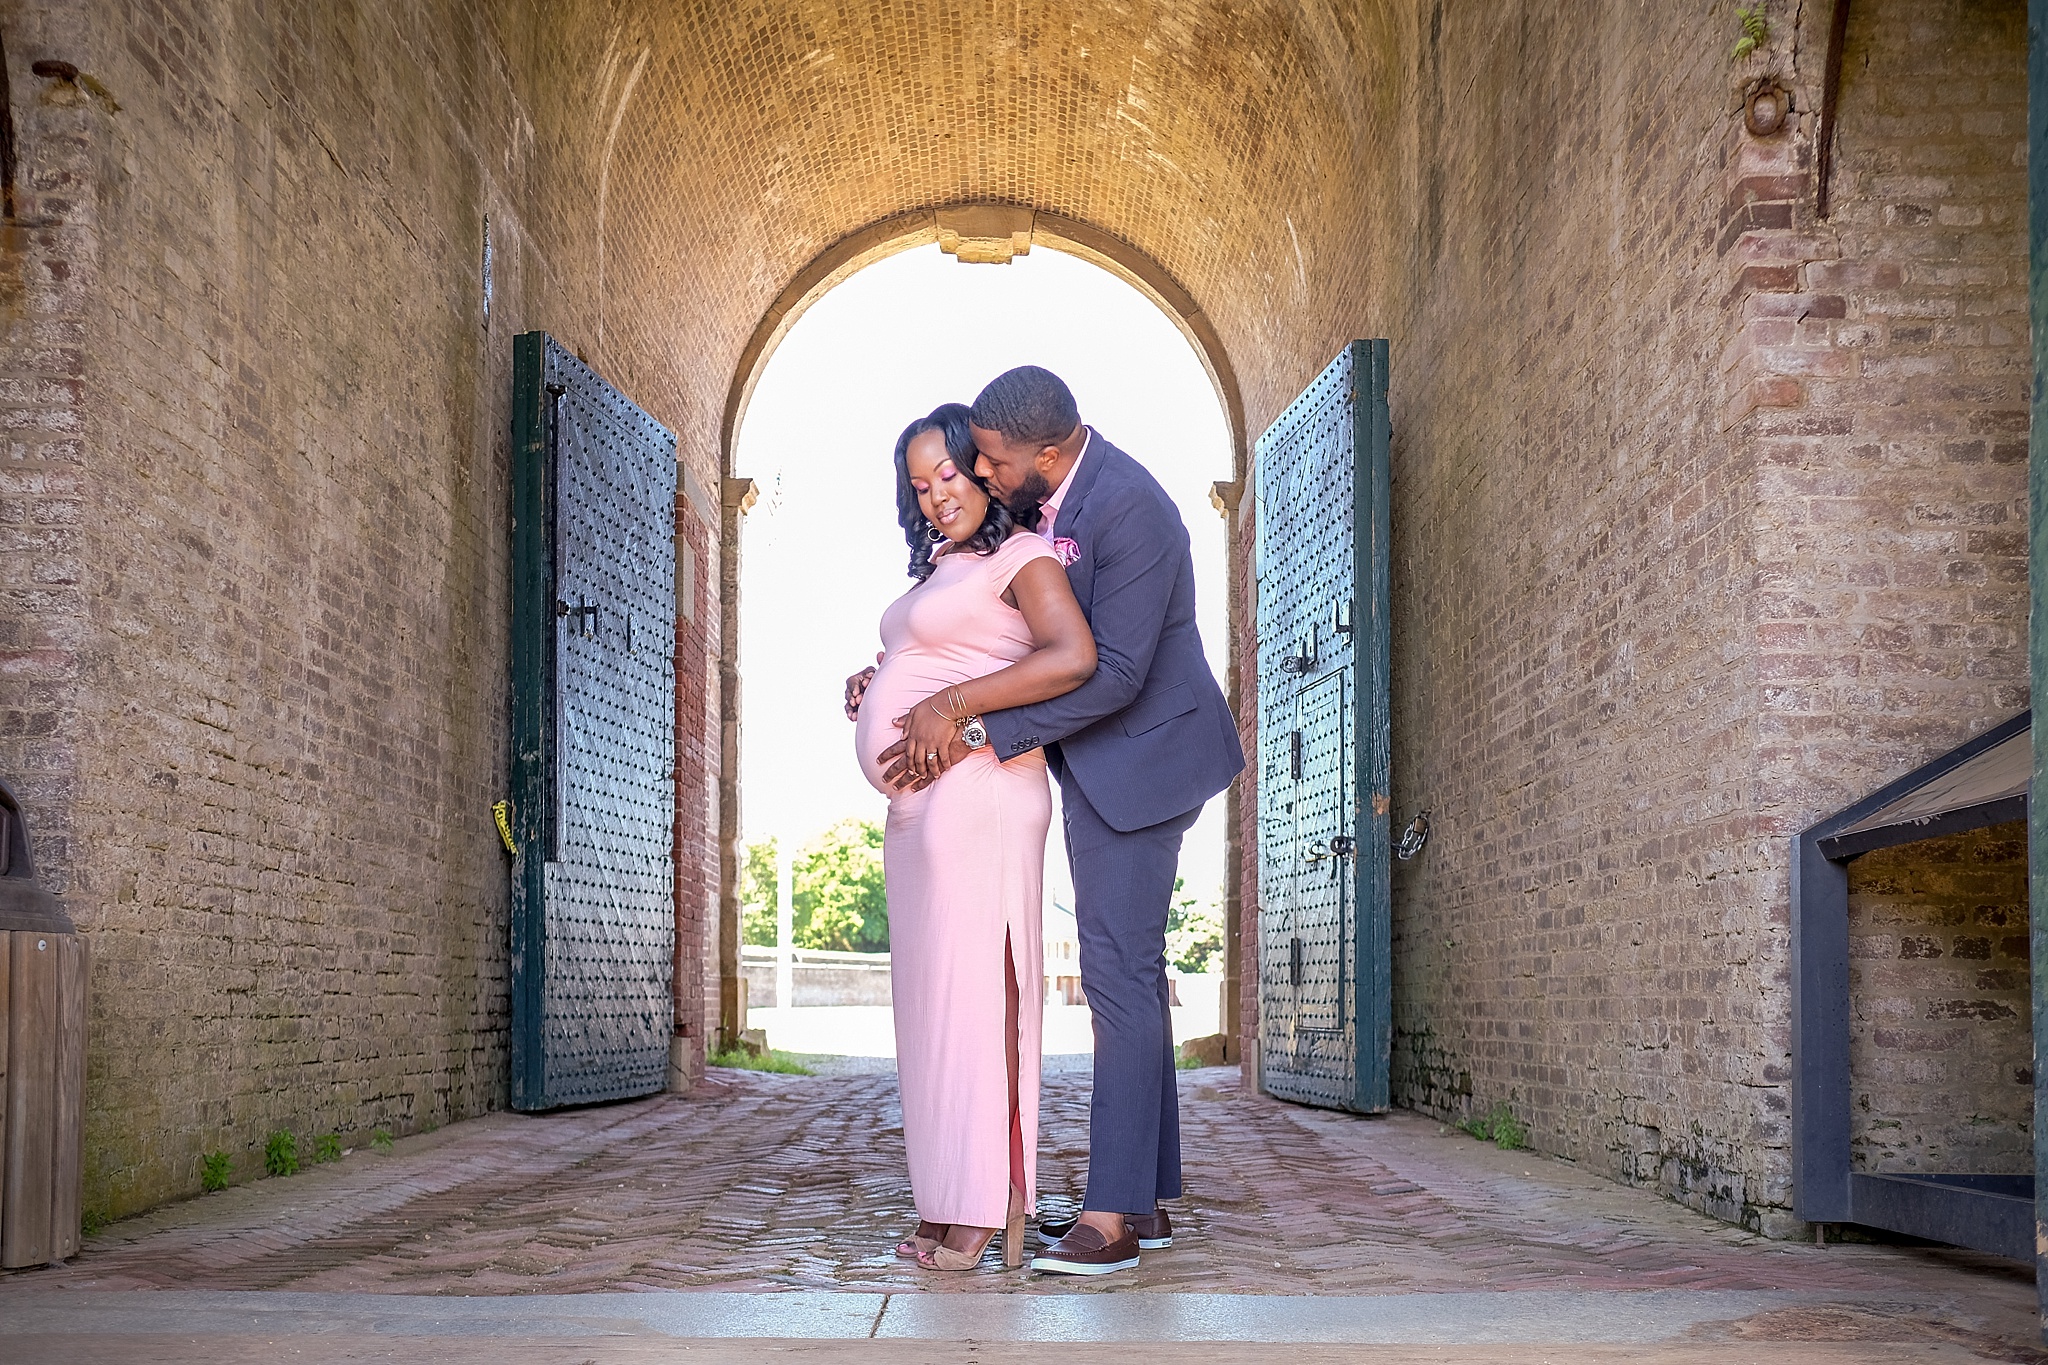 Damien-carter-photography-ft-washington-state-park-maternity-session-snuggling